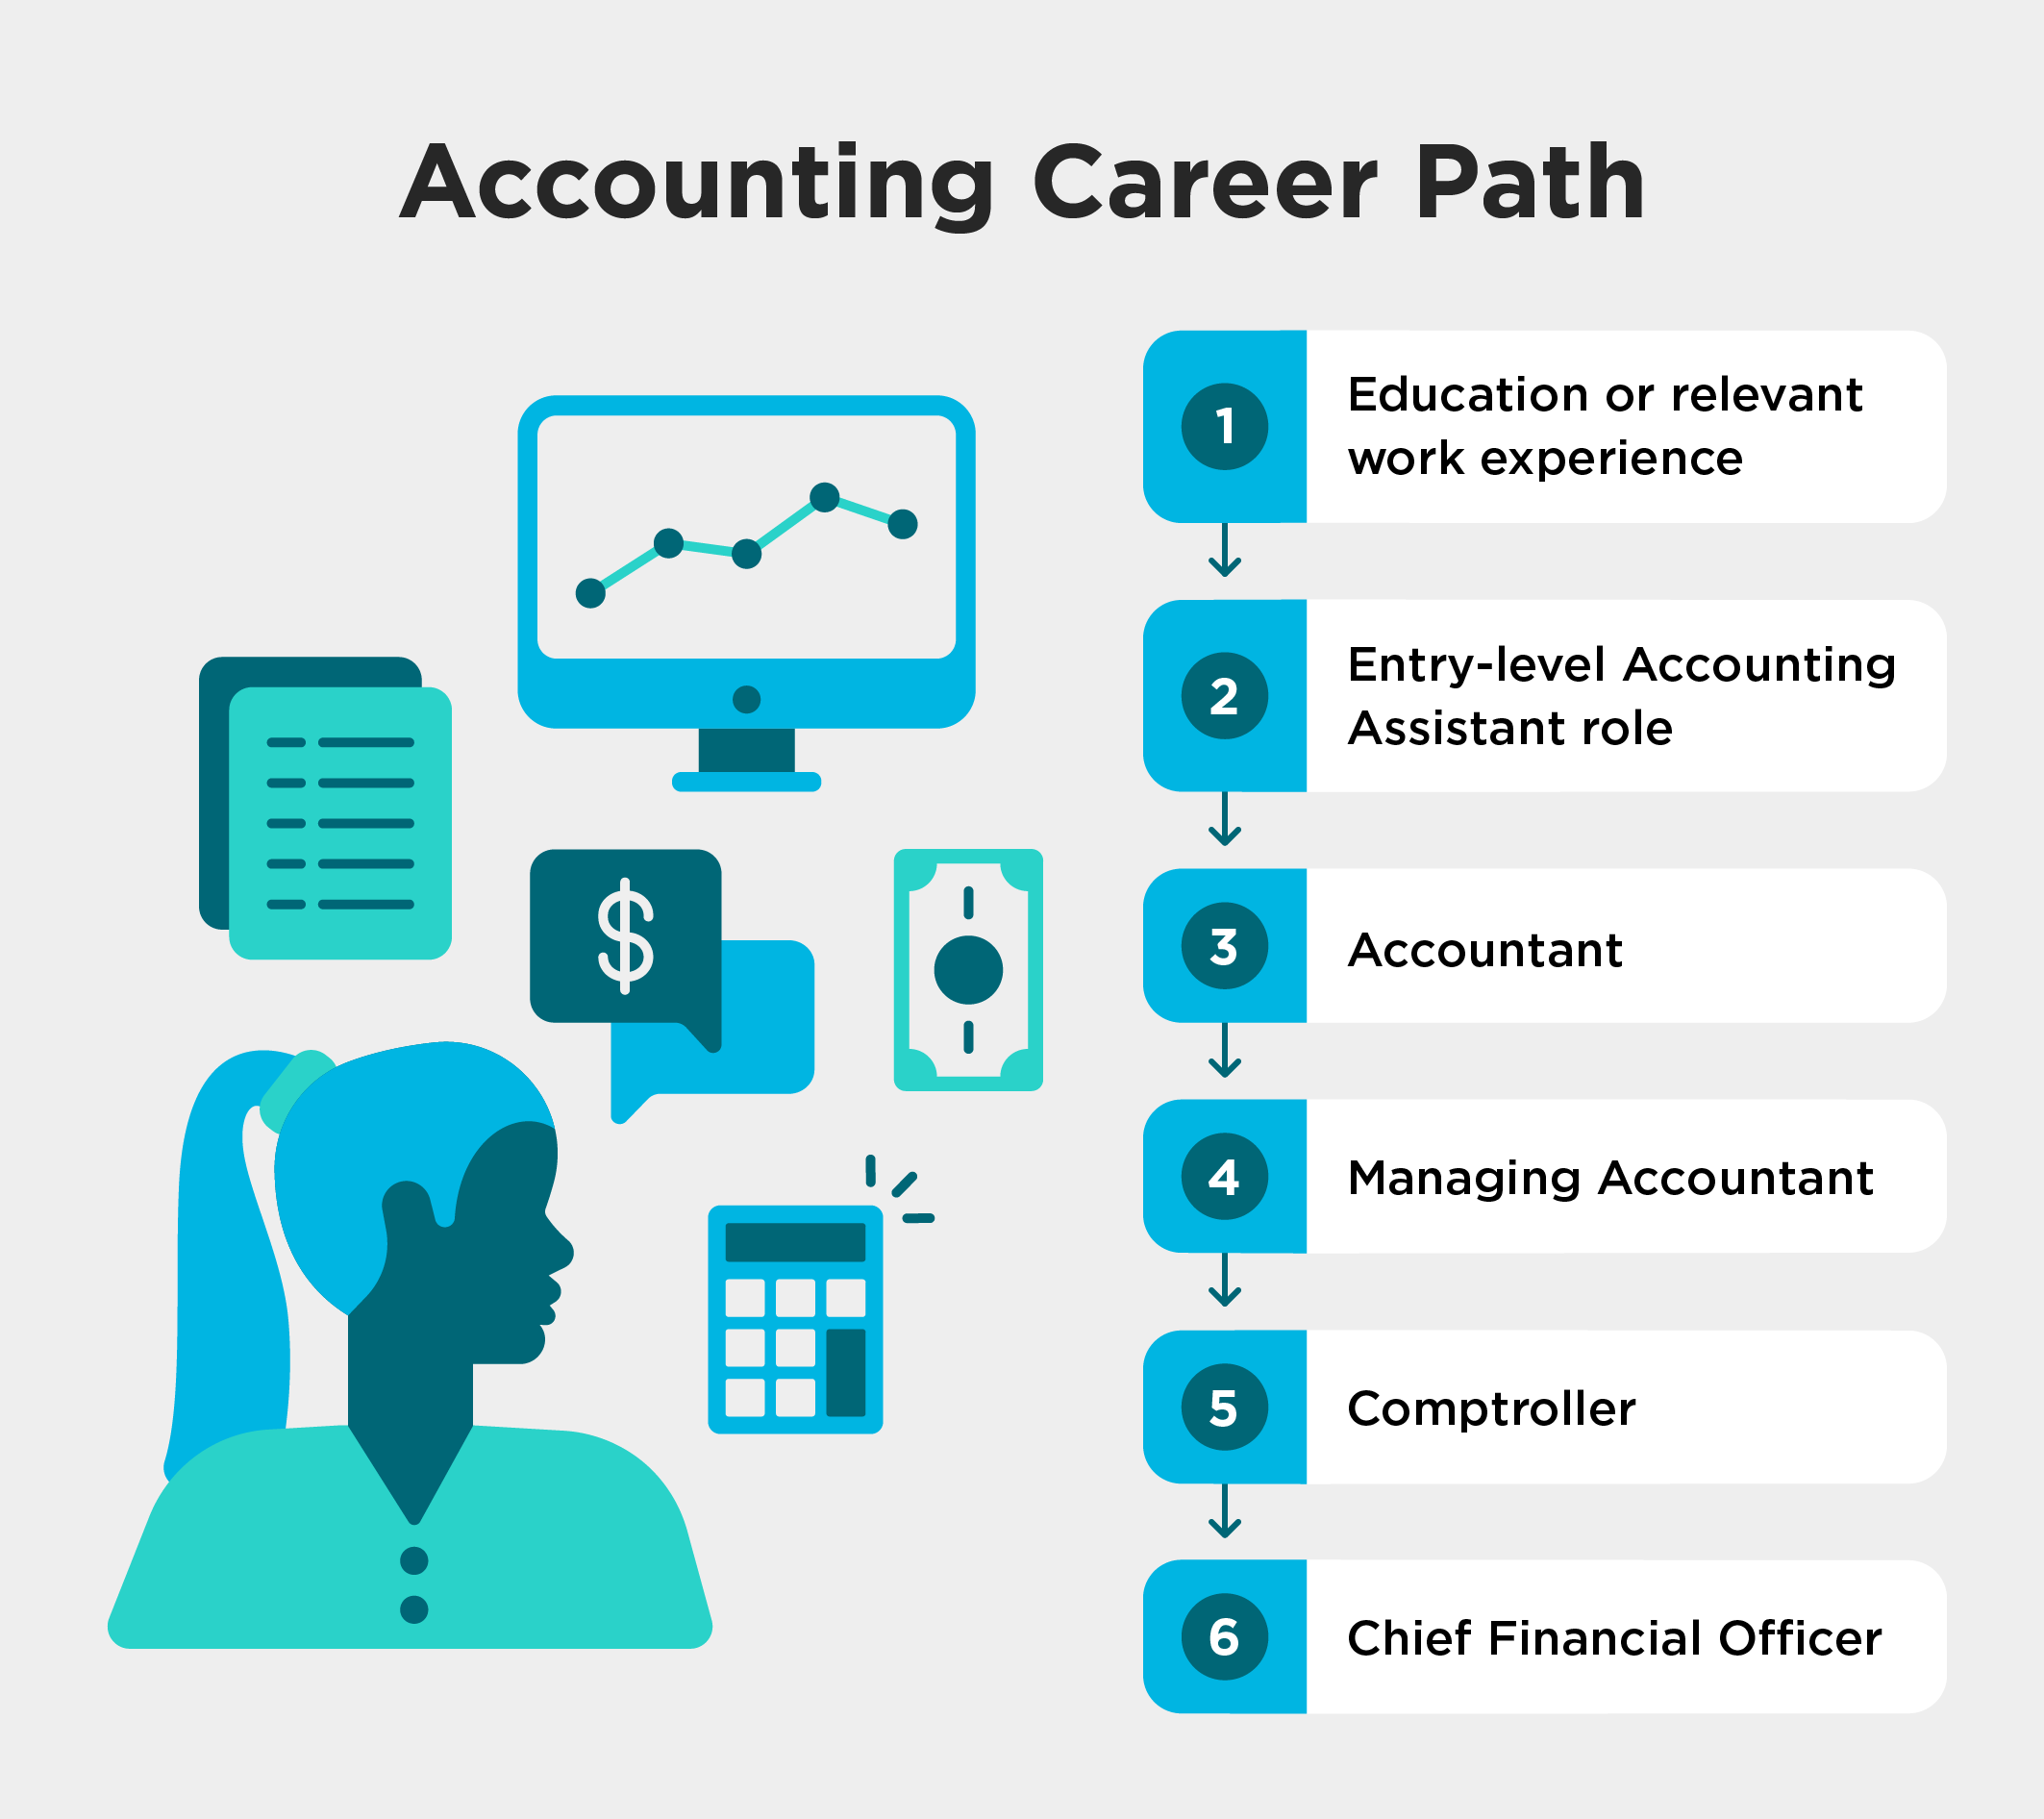 Illustration showing the accounting career path from education to CFO